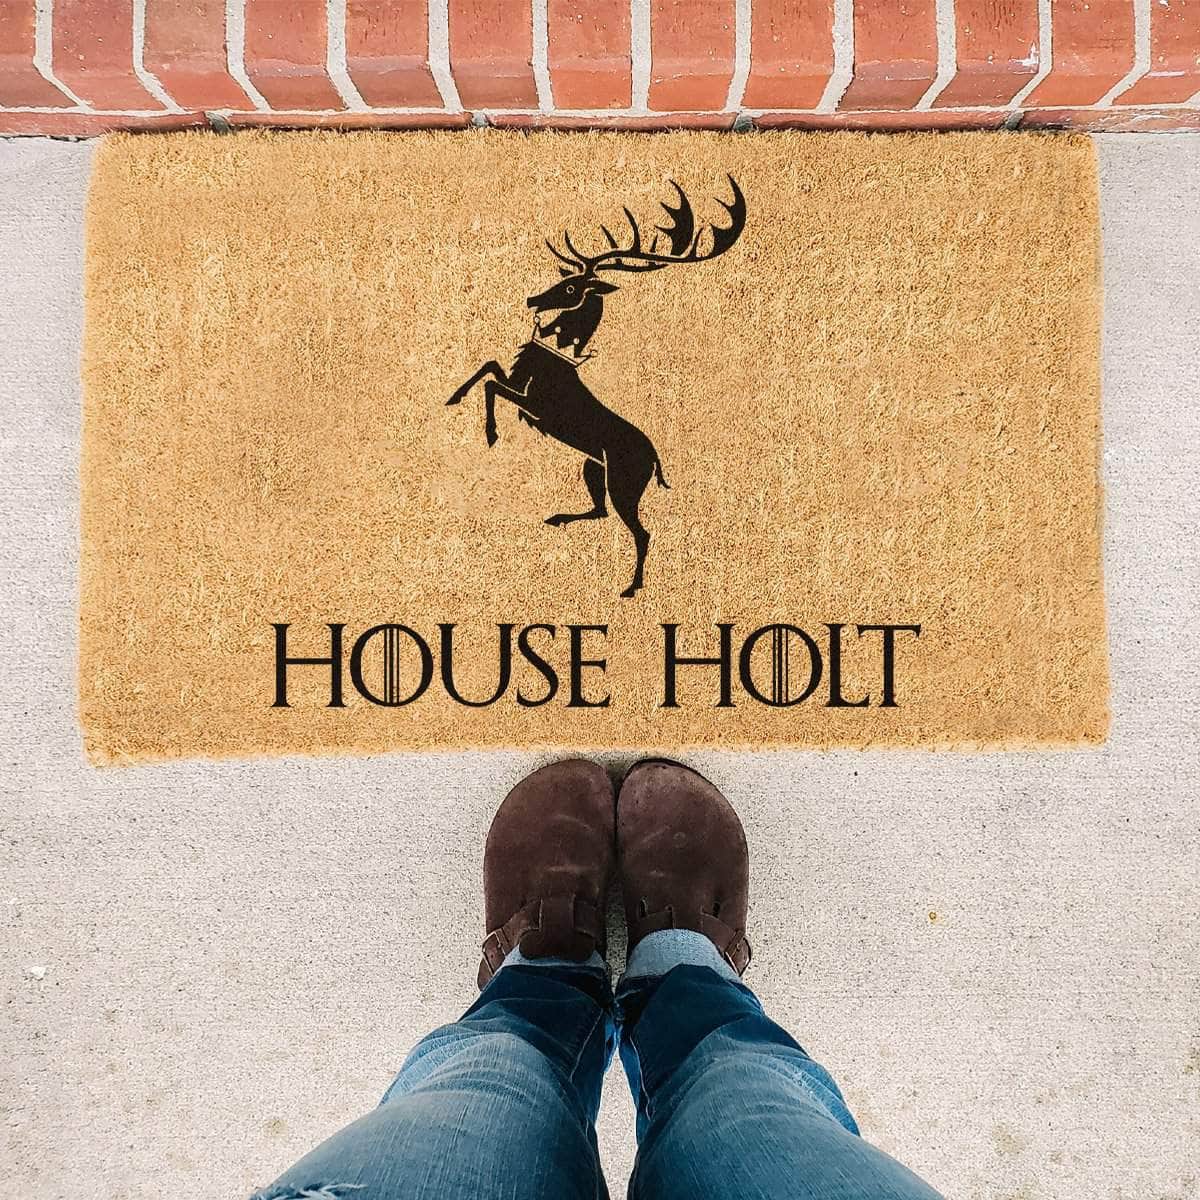 Custom Family Name Game Of Thrones House Baratheon Stag Sigil - Doormat